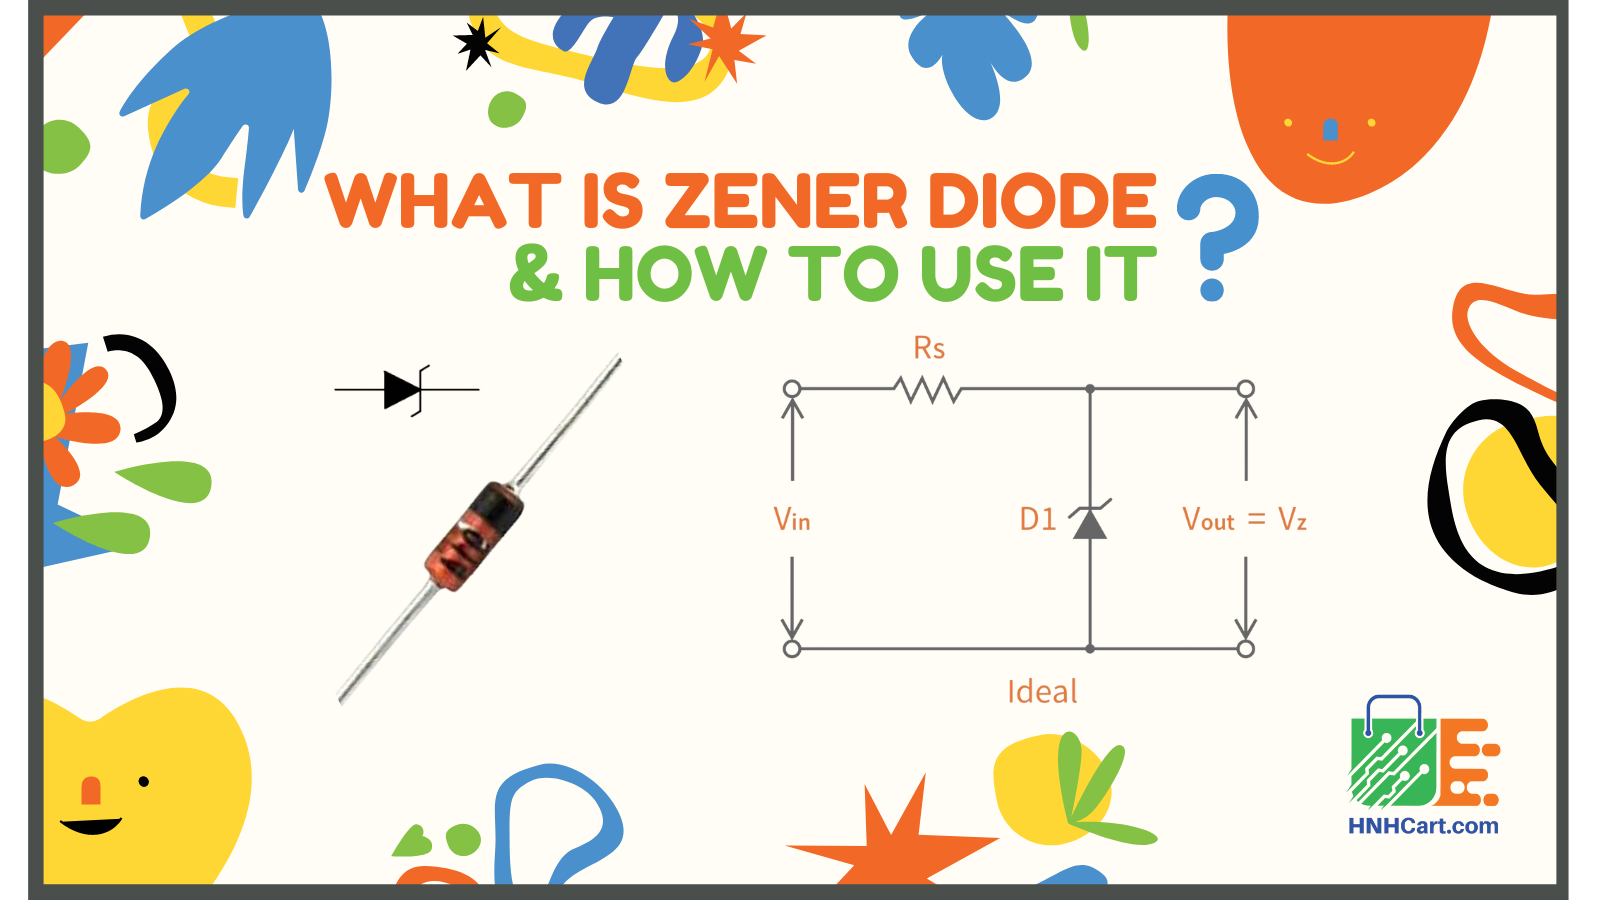 Zener Diode - How To Use Zener Diode